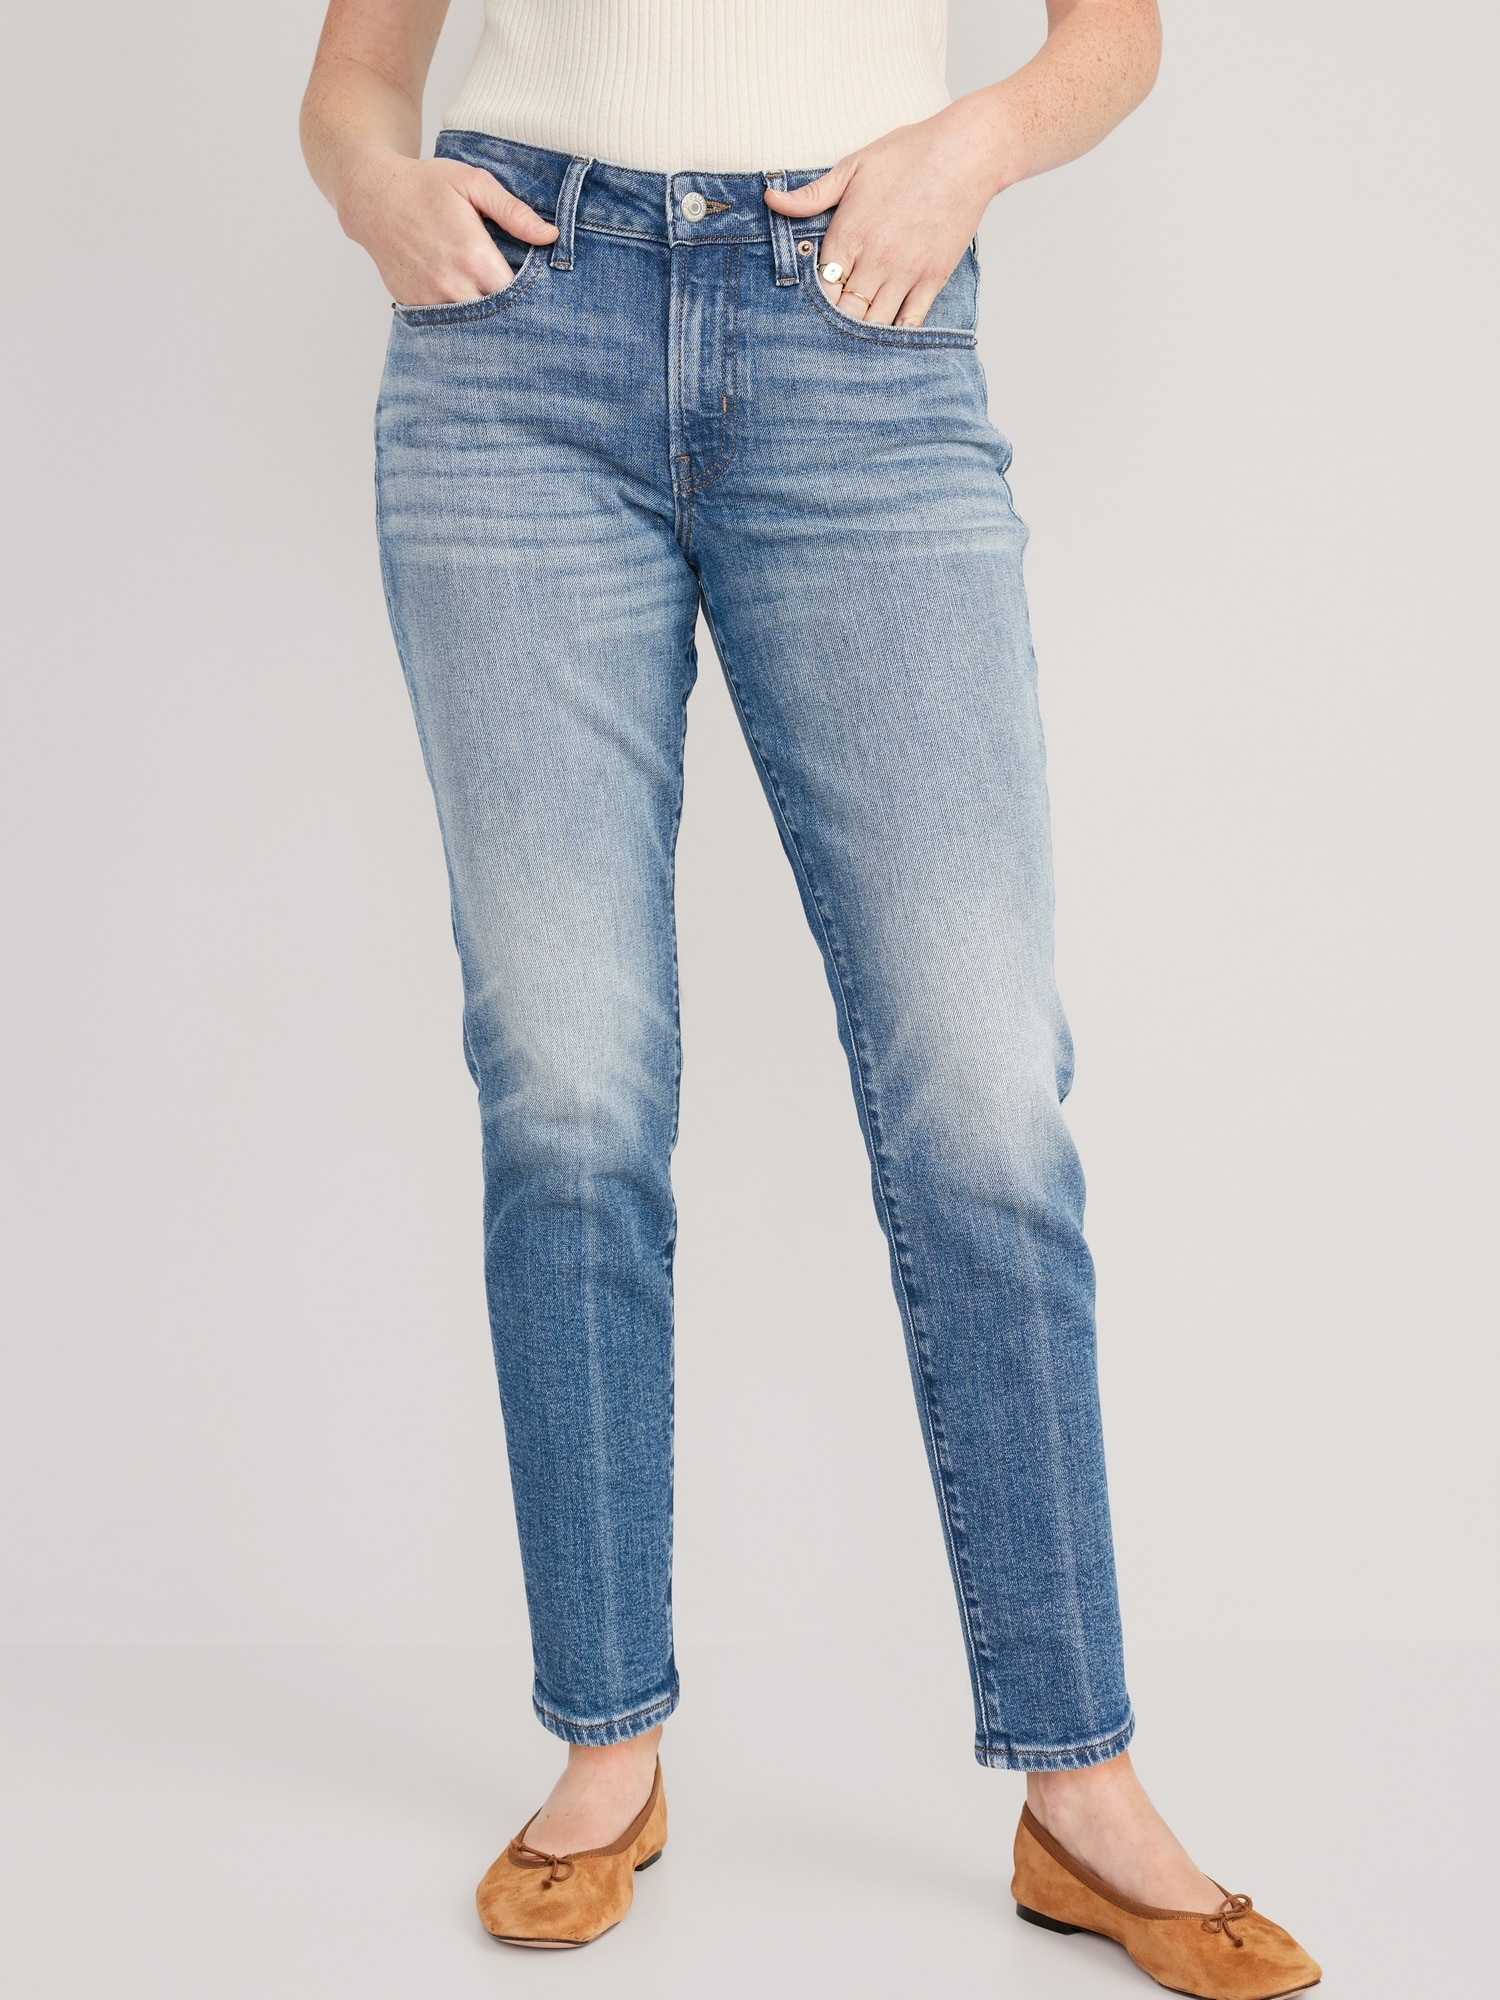 Buy Nora Mid Rise Skinny Pull-On Jeans Petite for USD 69.00